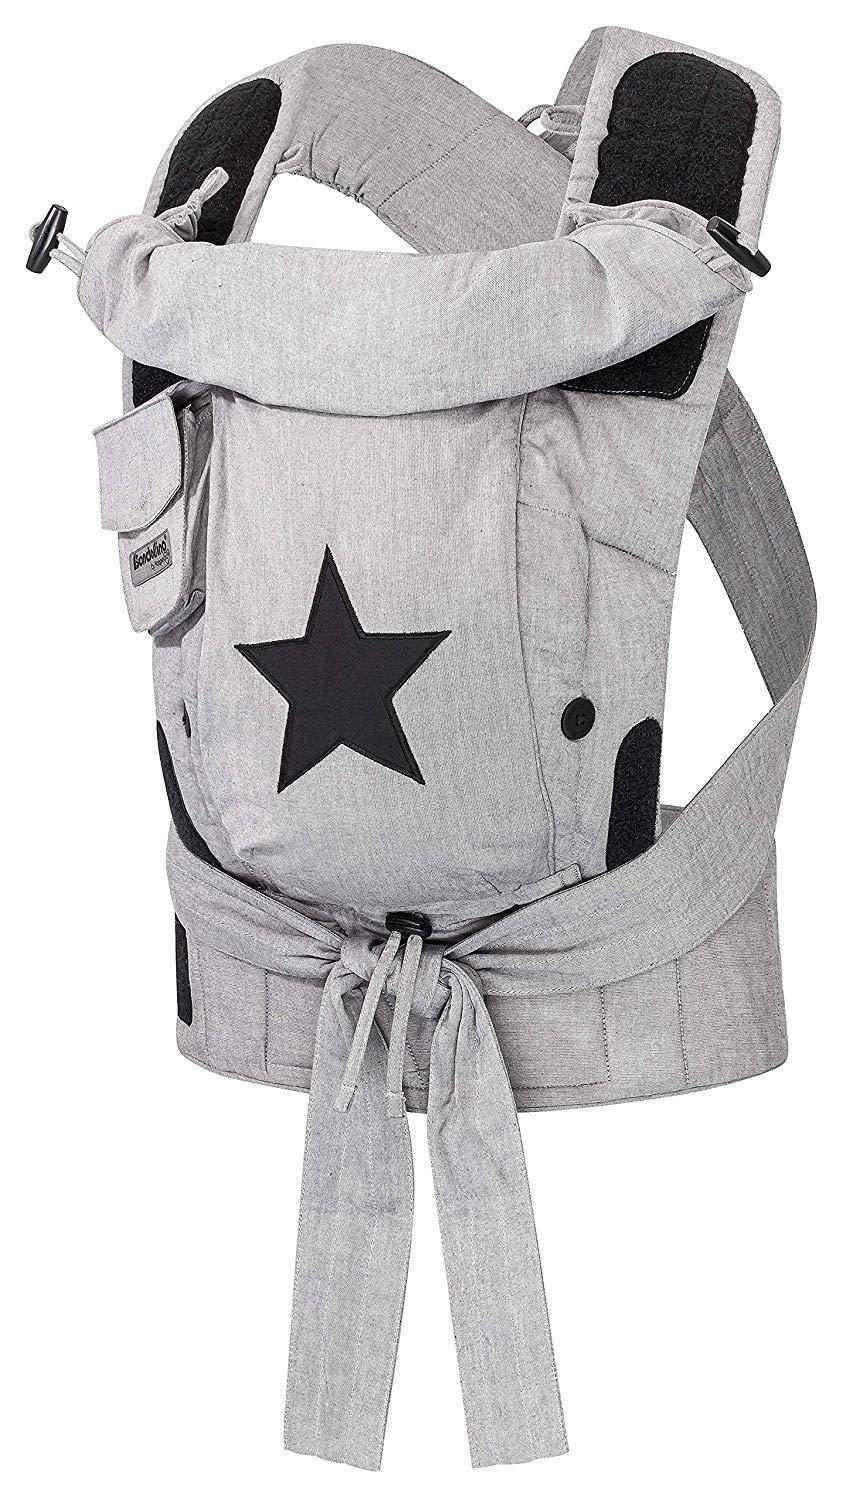 Bondolino Plus Baby Carrier With Tying Instructions